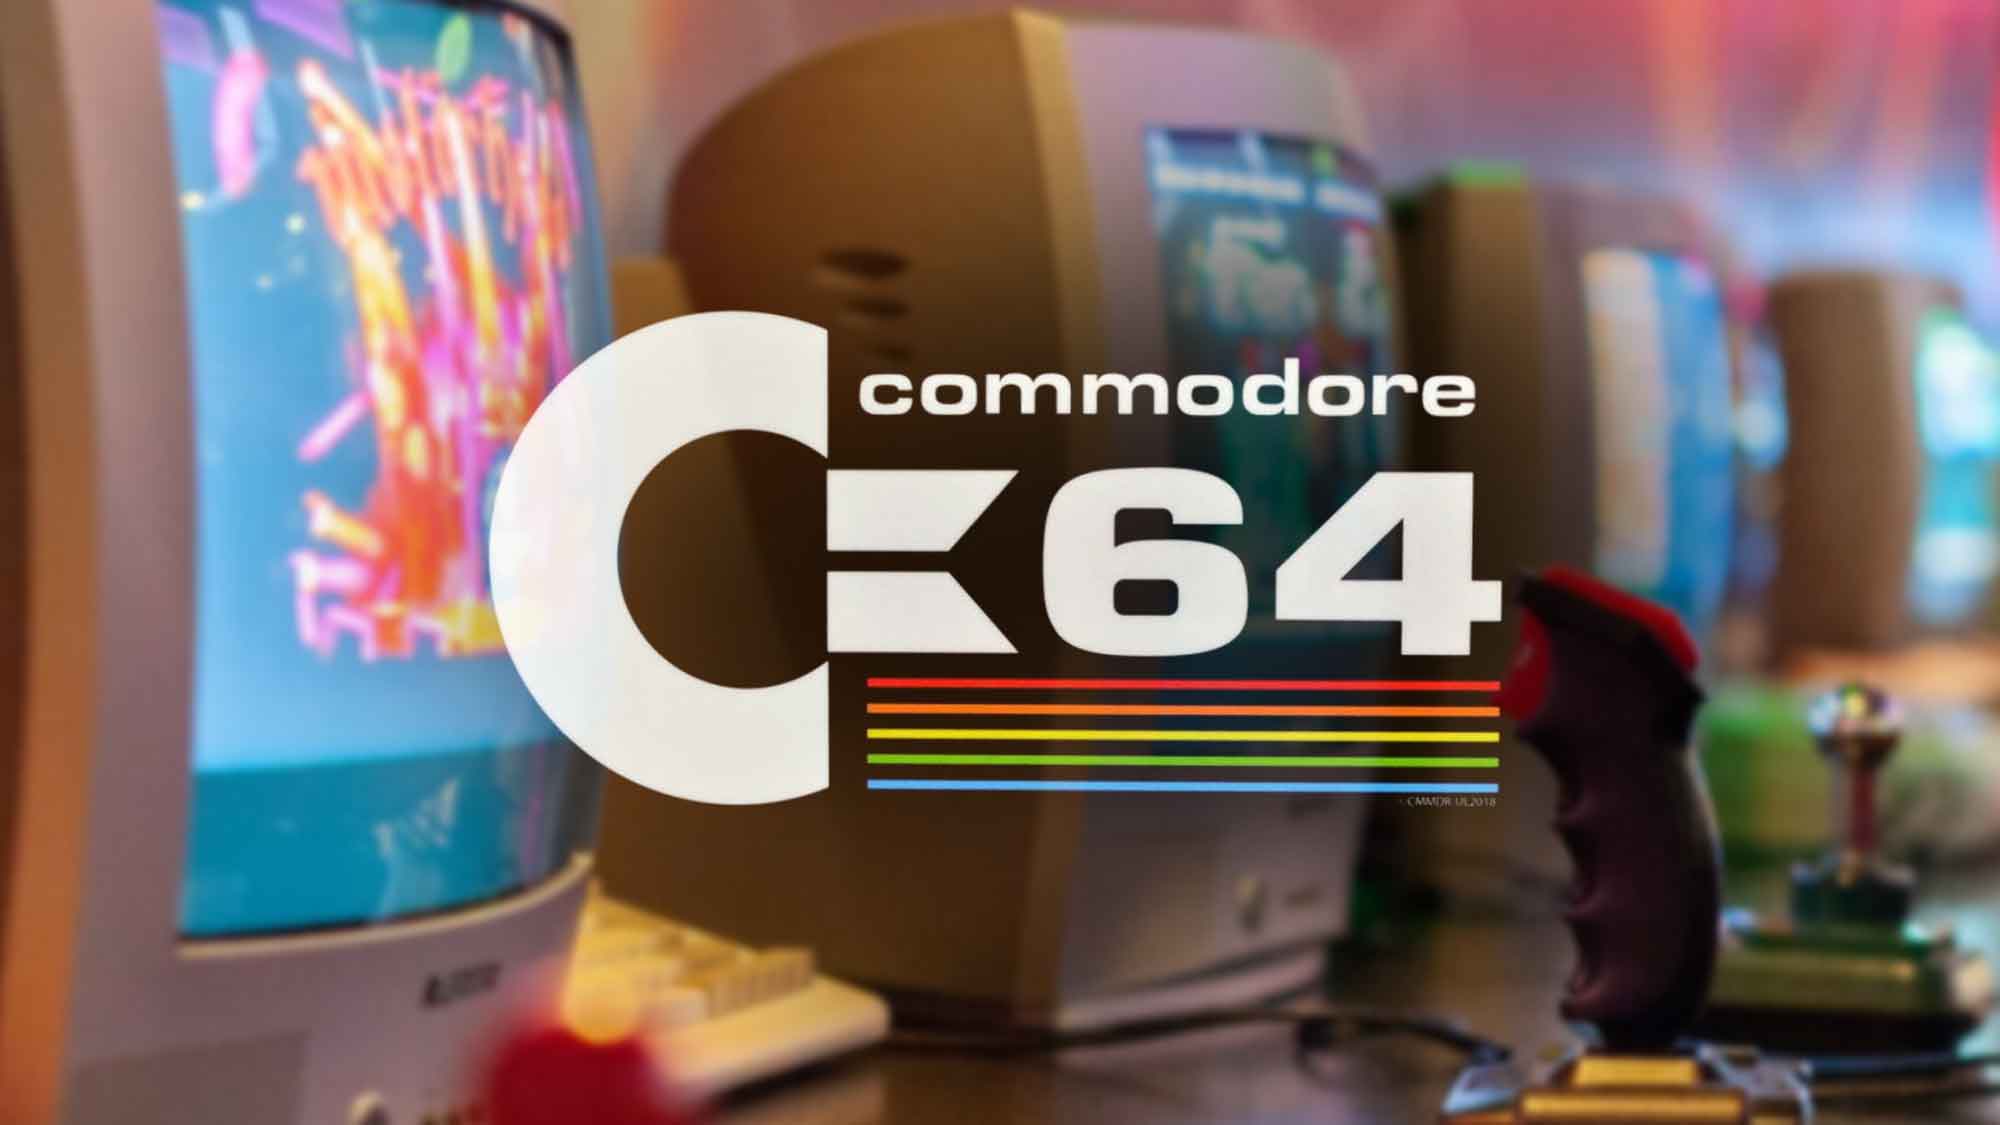 How To Install Twitter on a Commodore 64 Computer